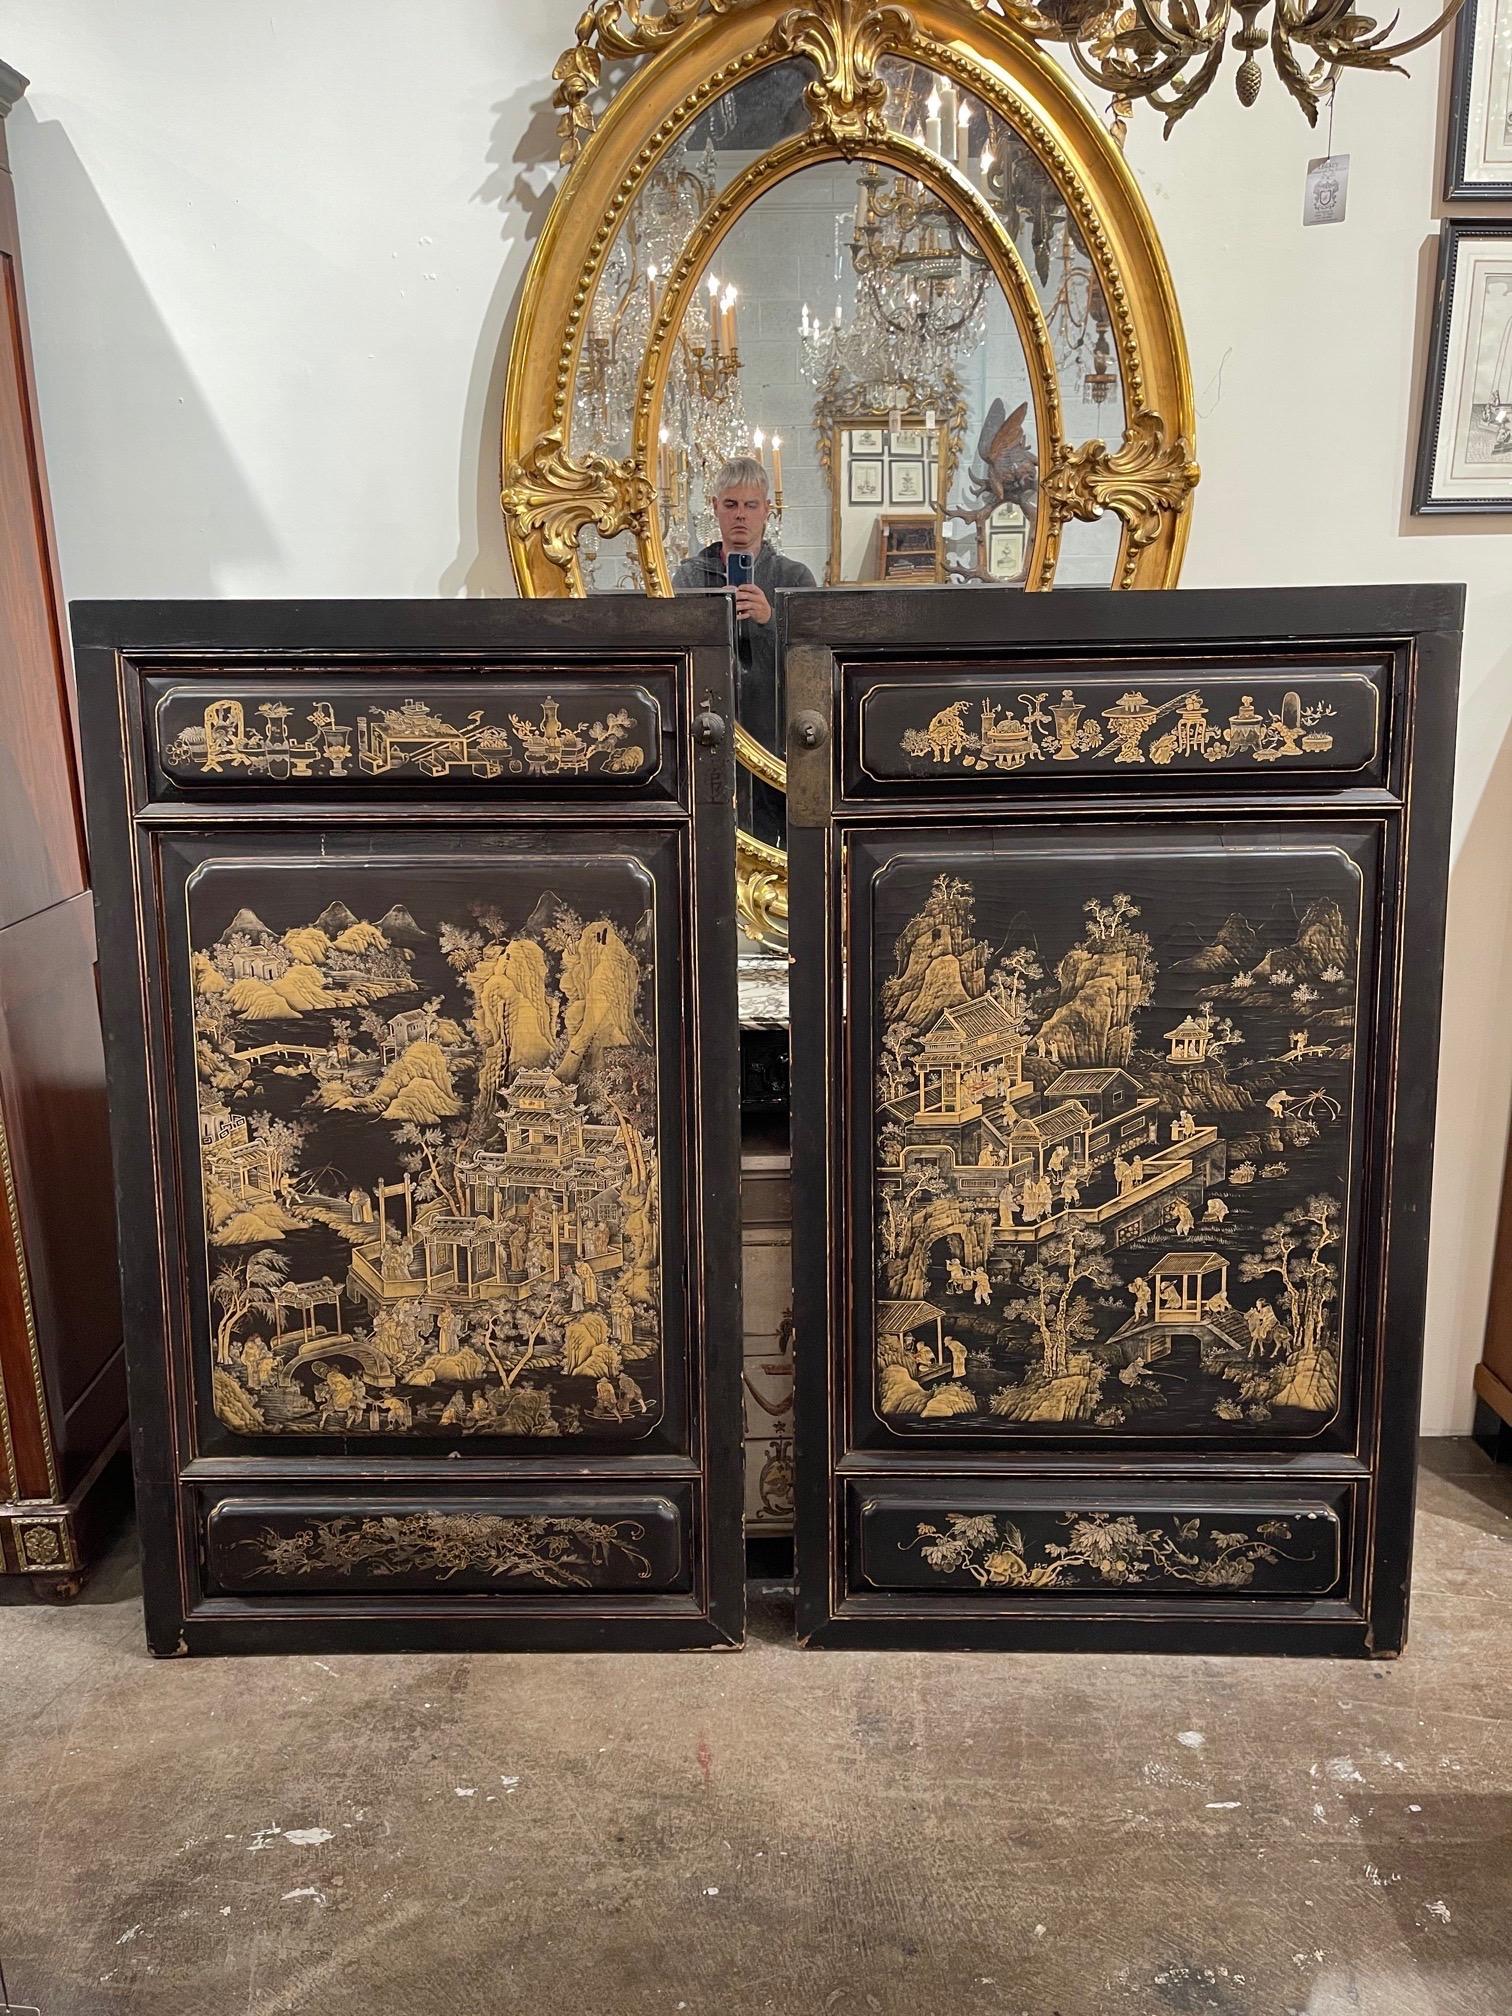 Decorative pair of large scale chinoiserie decorated wall panels. Interesting Asian scenes with amazing layers of detail on these. Makes a beautiful statement!